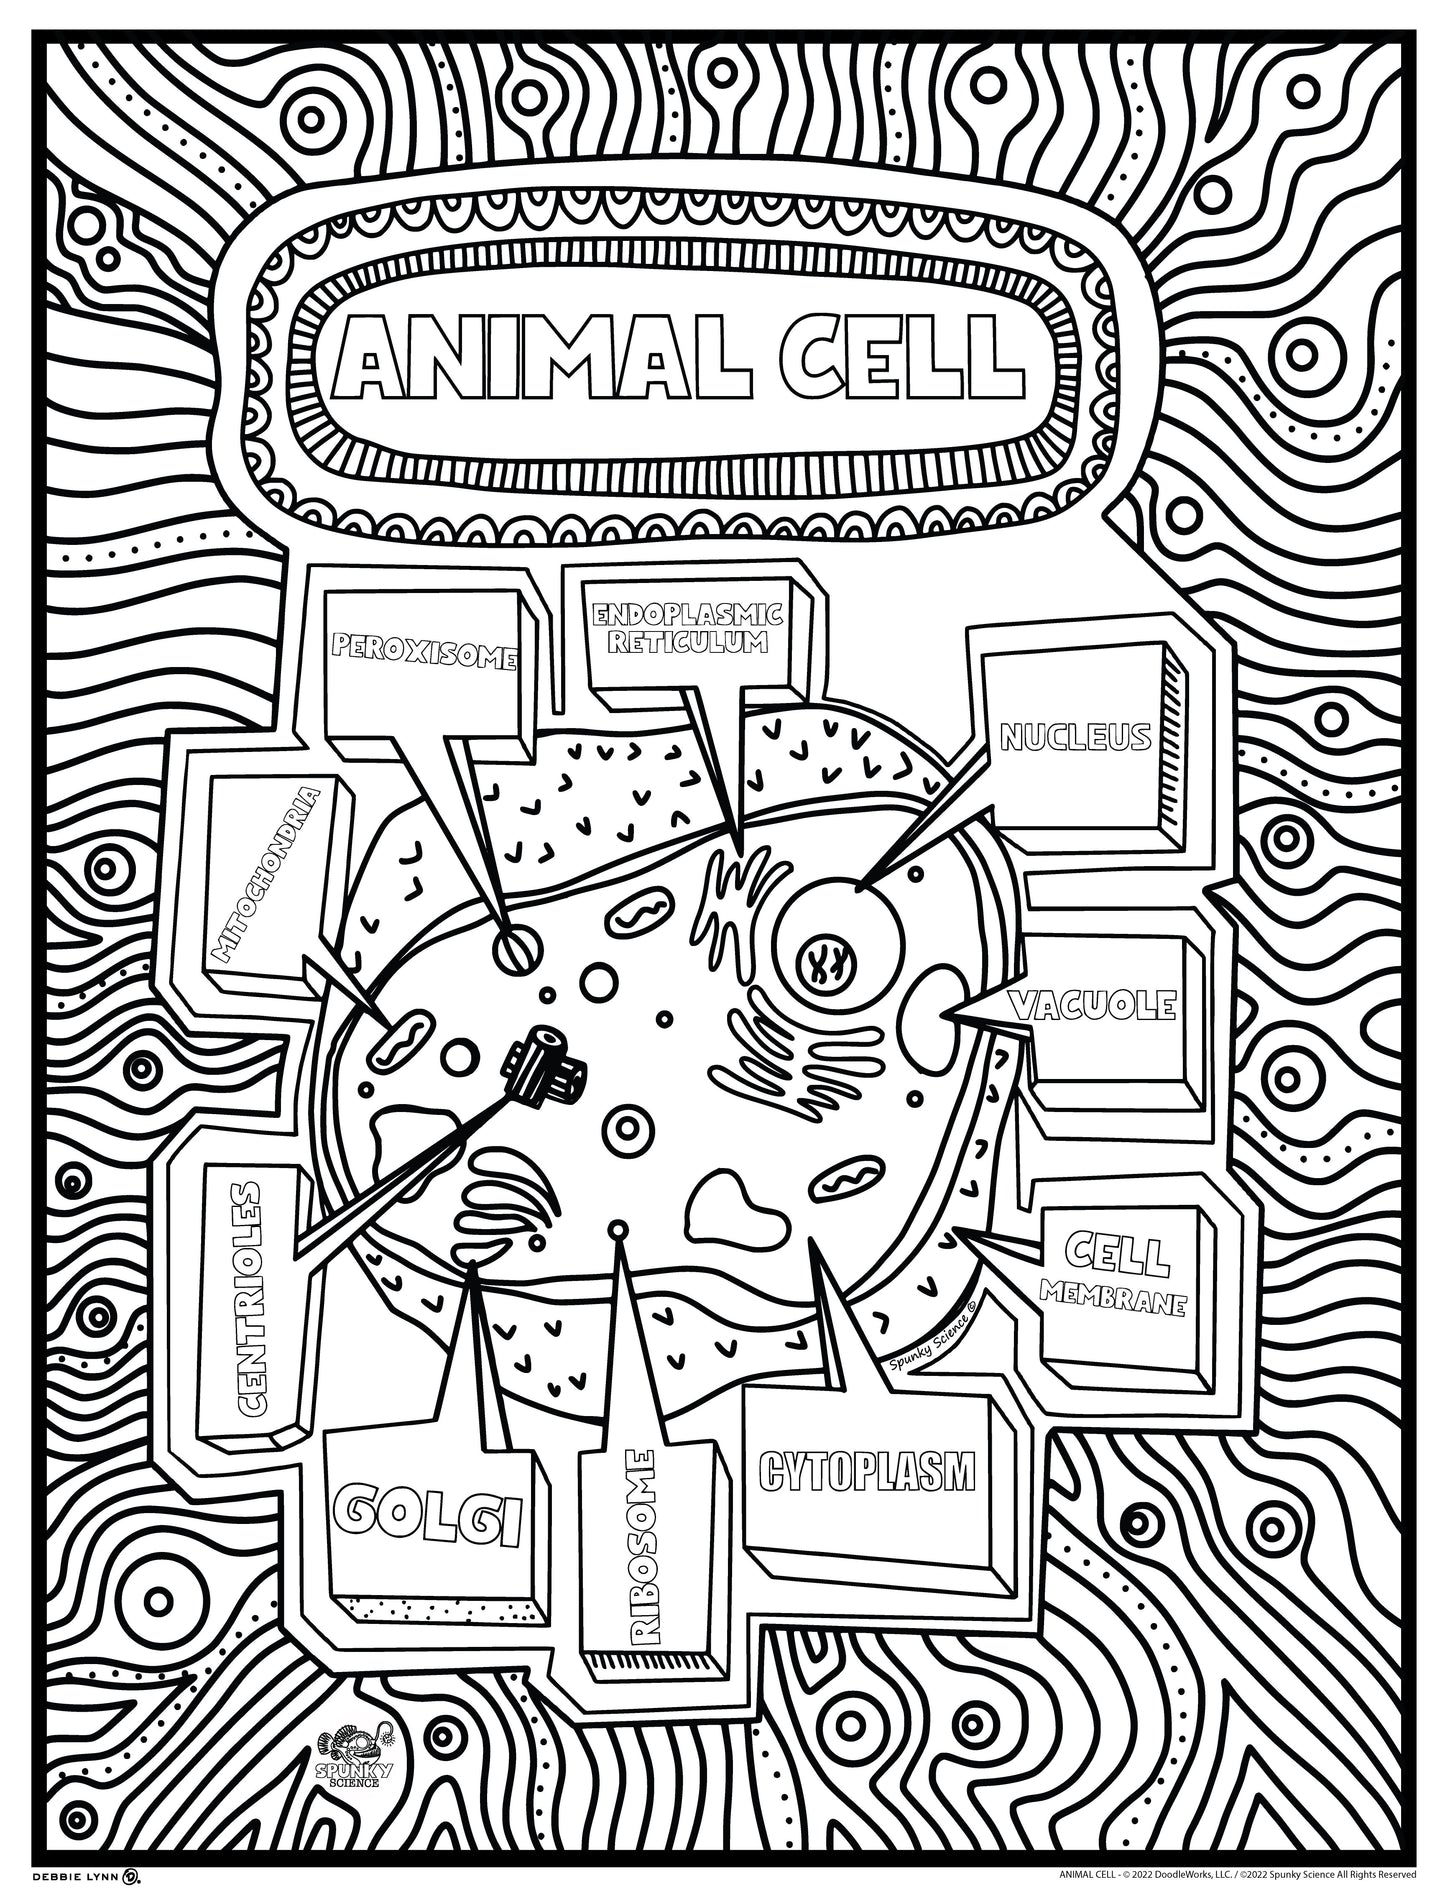 Animal Cell Spunky Science Personalized Giant Coloring Poster 46"x60"